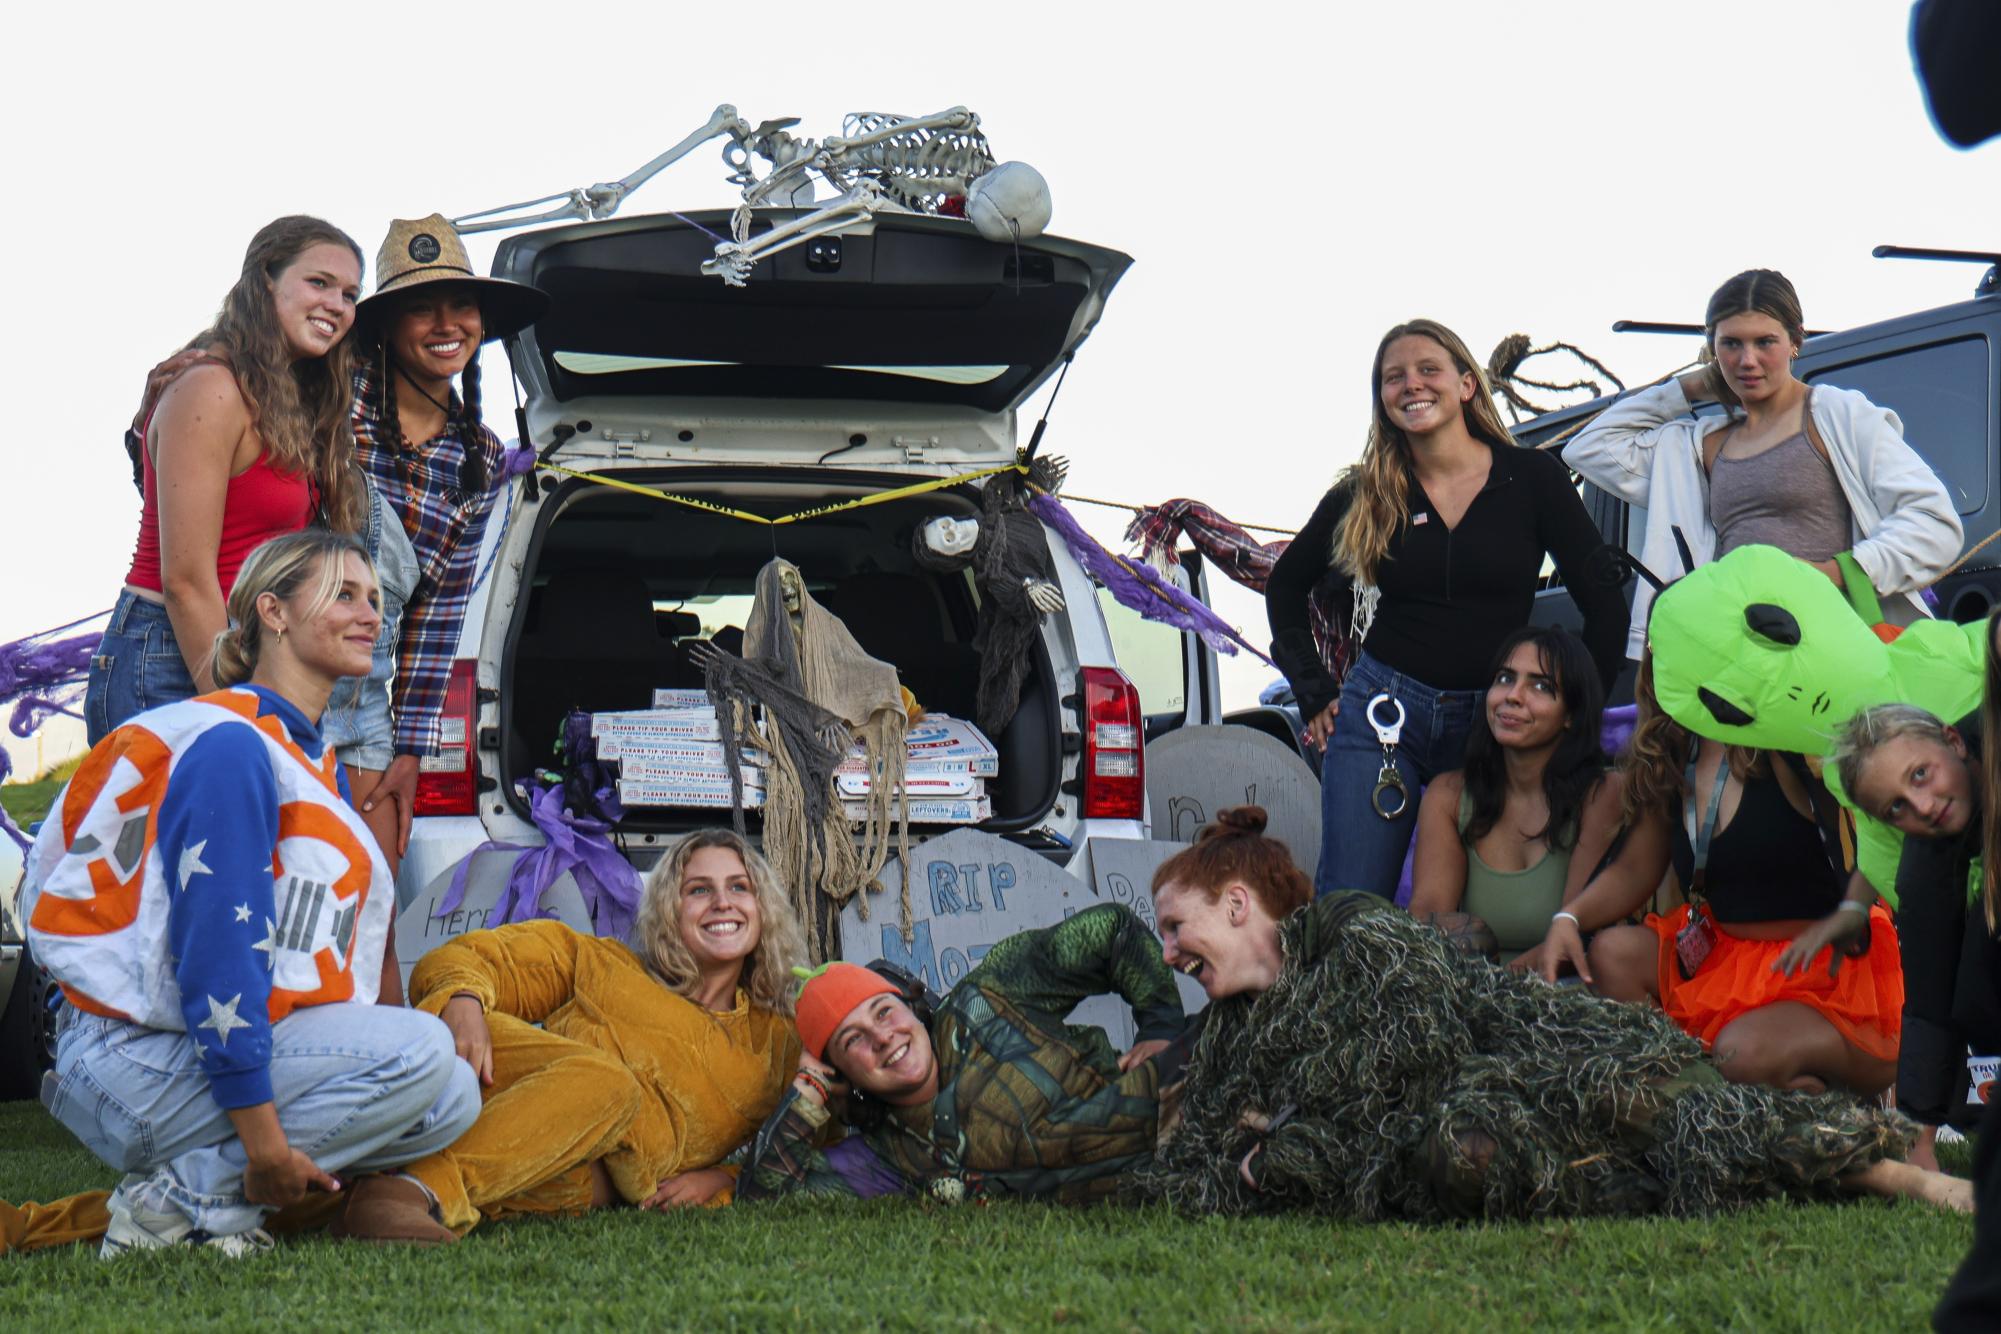 City College students surround their trunk decorations during Trunk-or-Treat on on Oct. 6 at City Colleges West Campus in Santa Barbara, Calif. All participants were judged on their set-ups, and an award was given out for the best decorations.